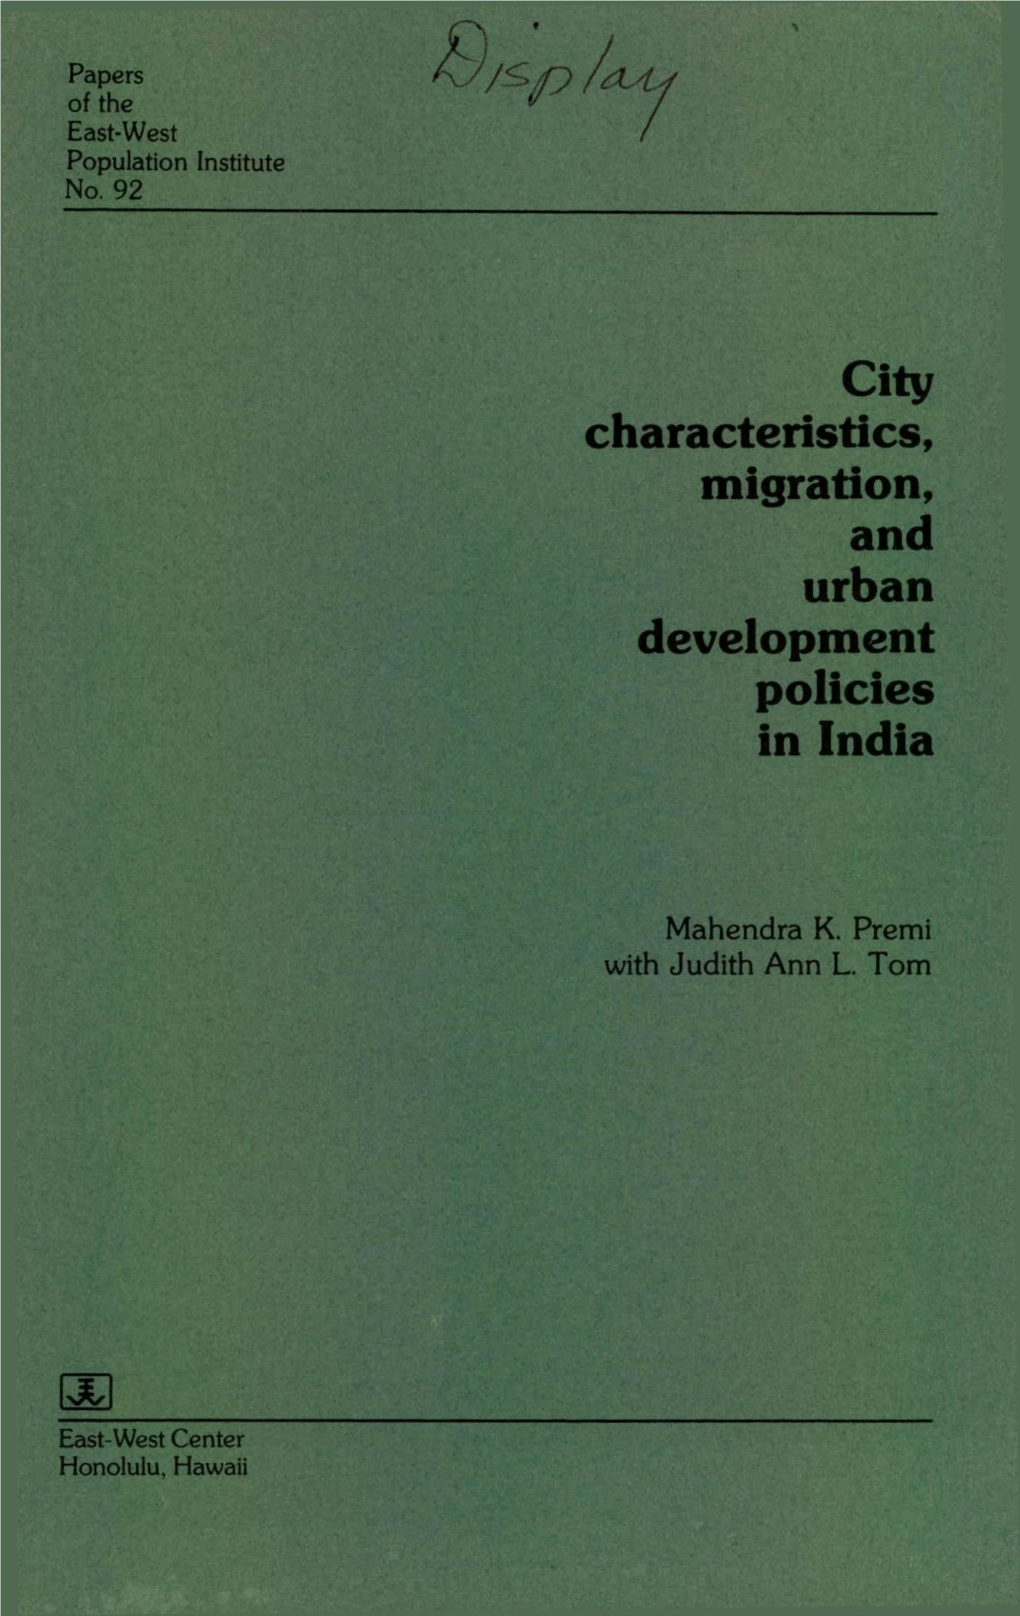 City Characteristics, Migration, and Urban Development Policies in India